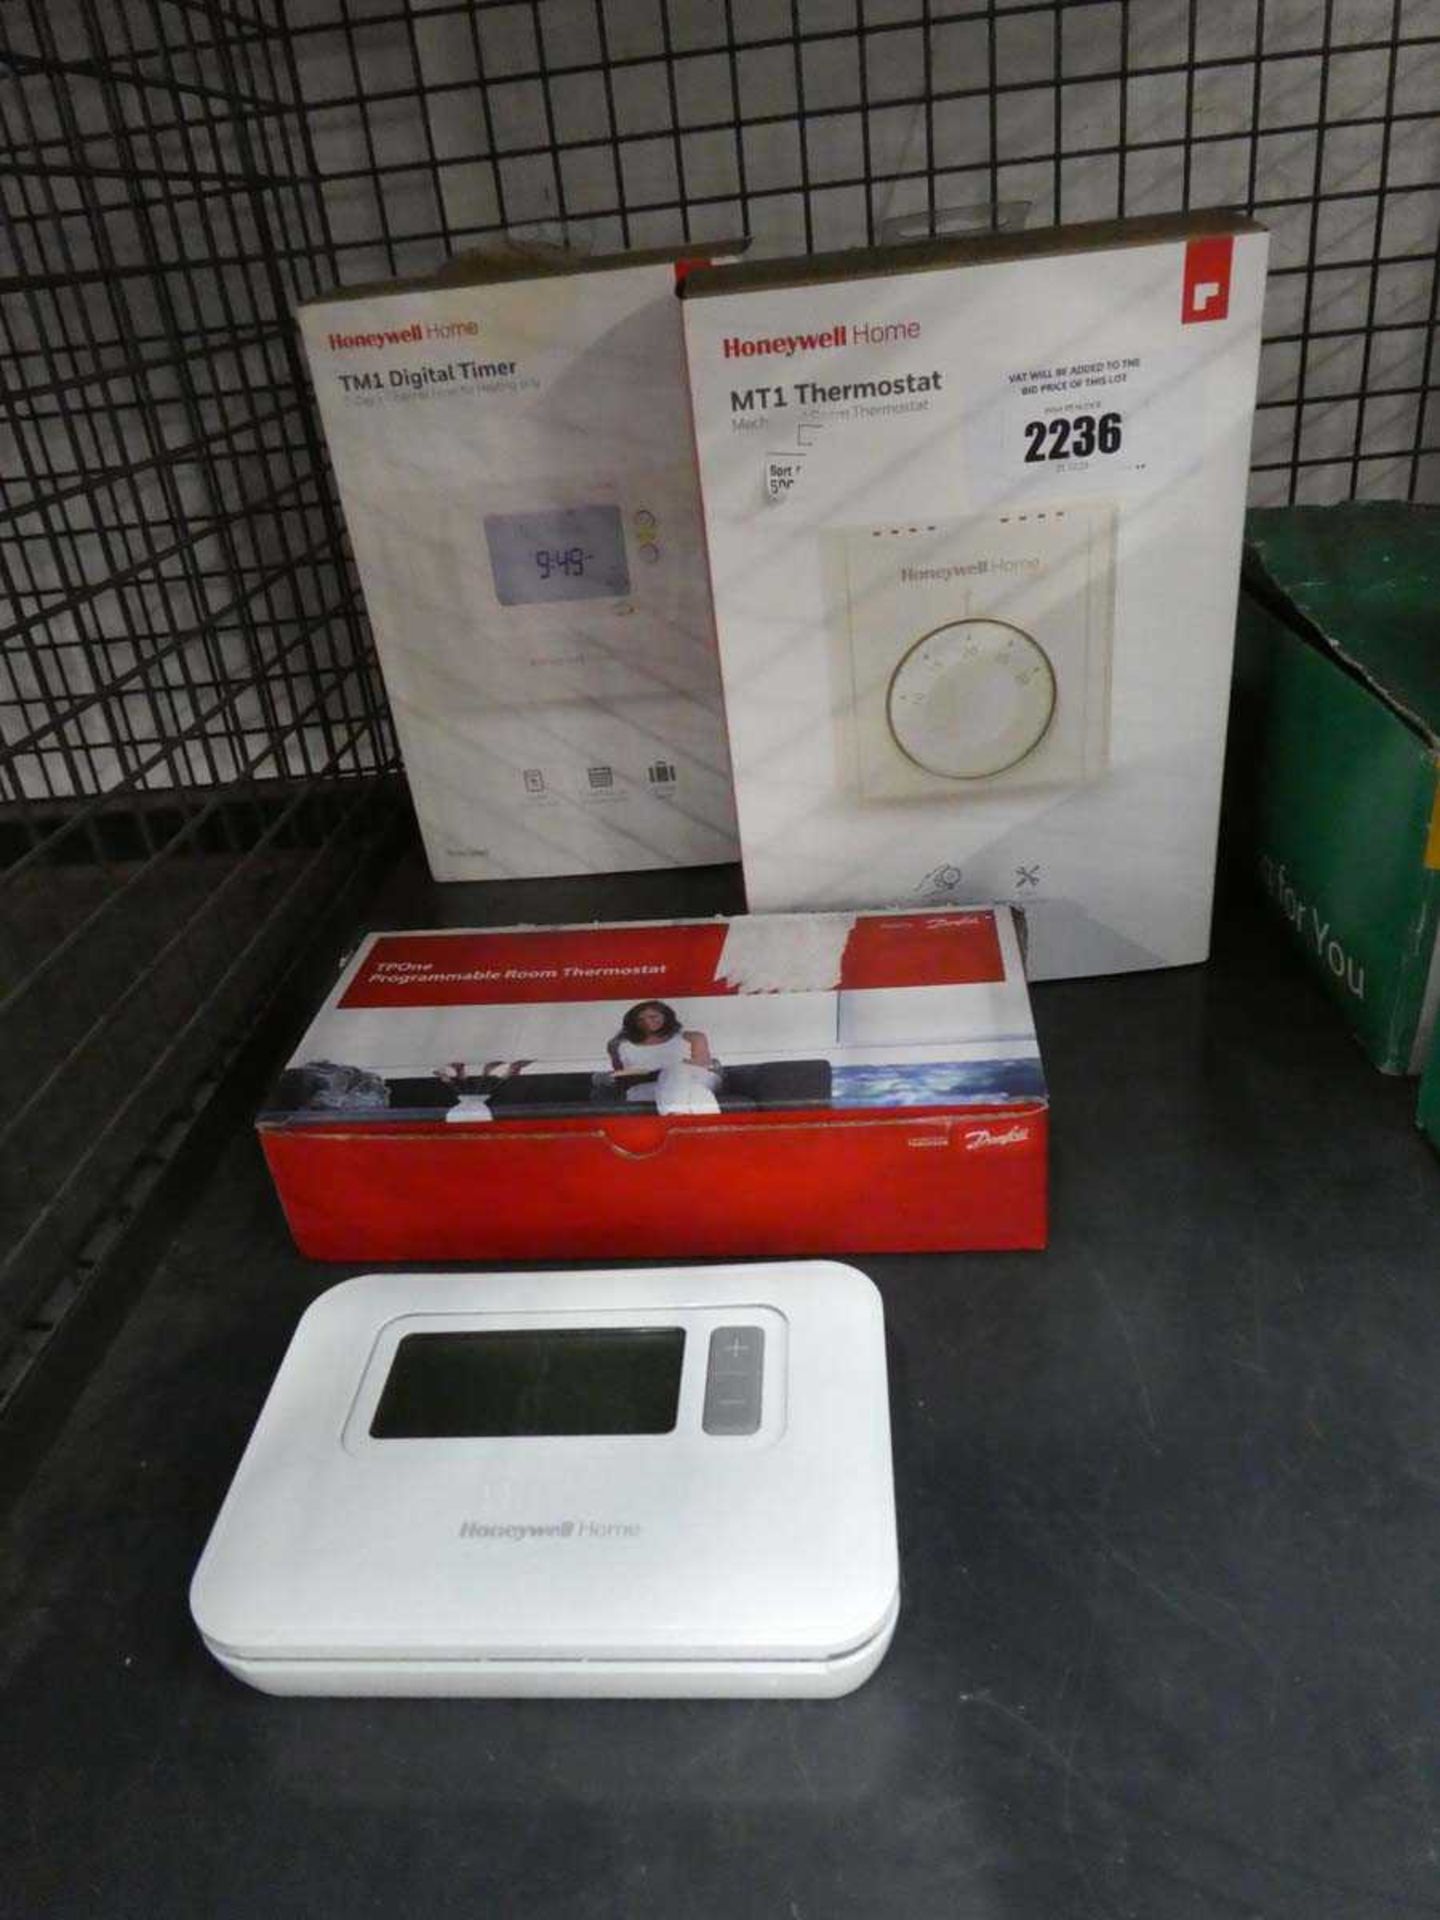 +VAT Honeywell Home MT1 mechanical thermostat with 2 other programmable thermostats